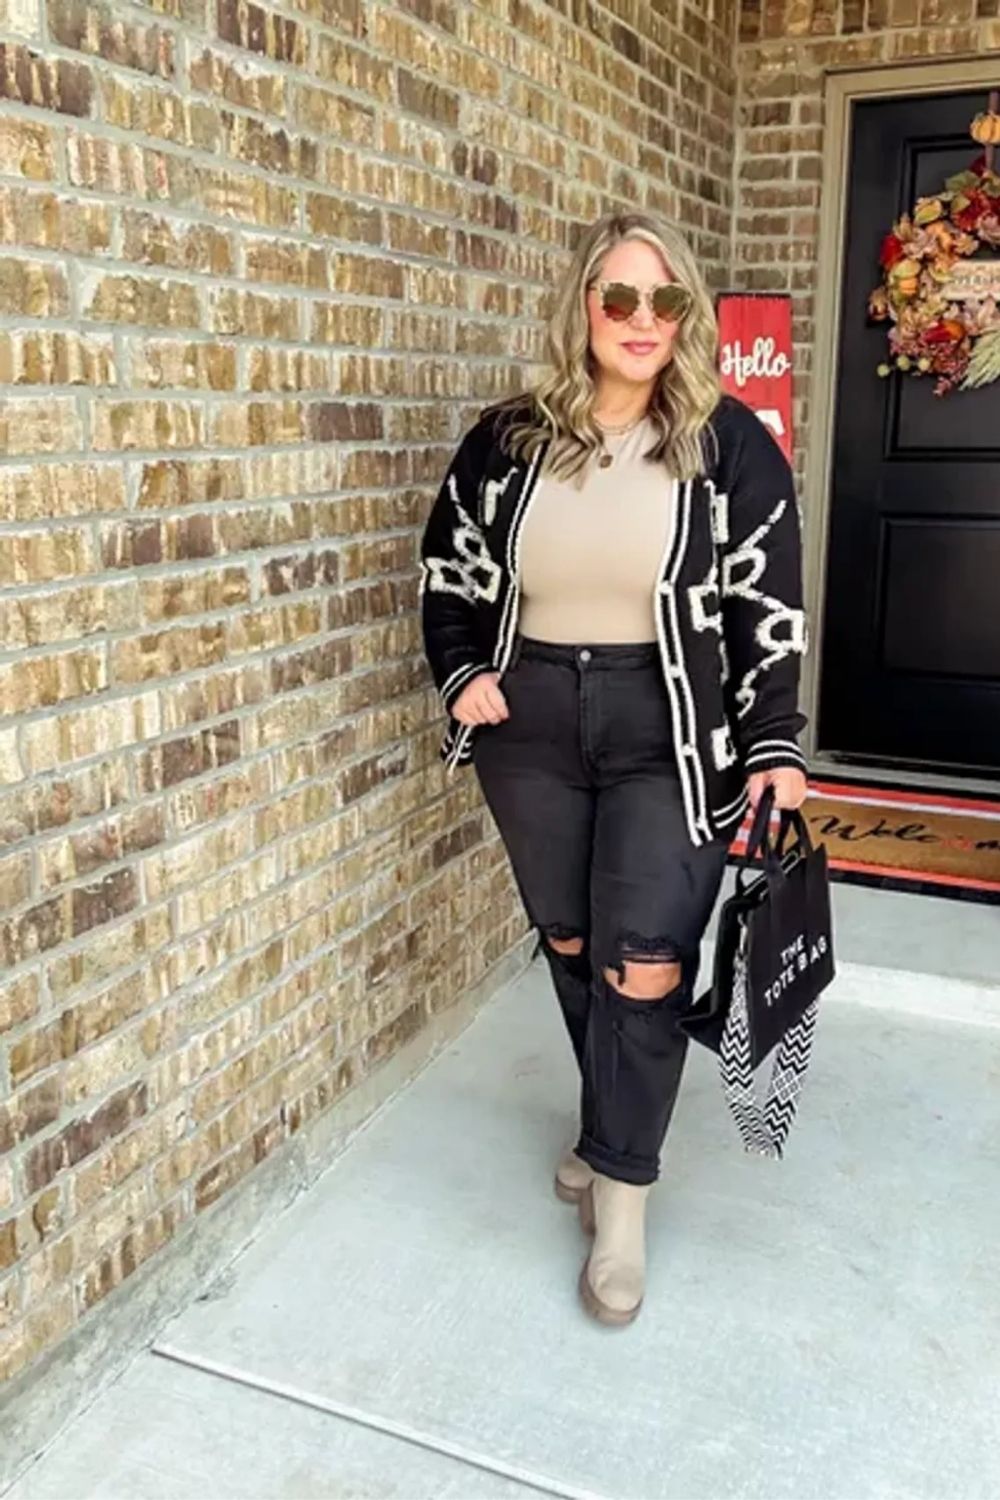 This ensemble radiates chic and effortless style with a bold black and white patterned cardigan against neutral tones, complemented by distressed black jeans and beige ankle boots, harmonizing casual with sophisticated elements.